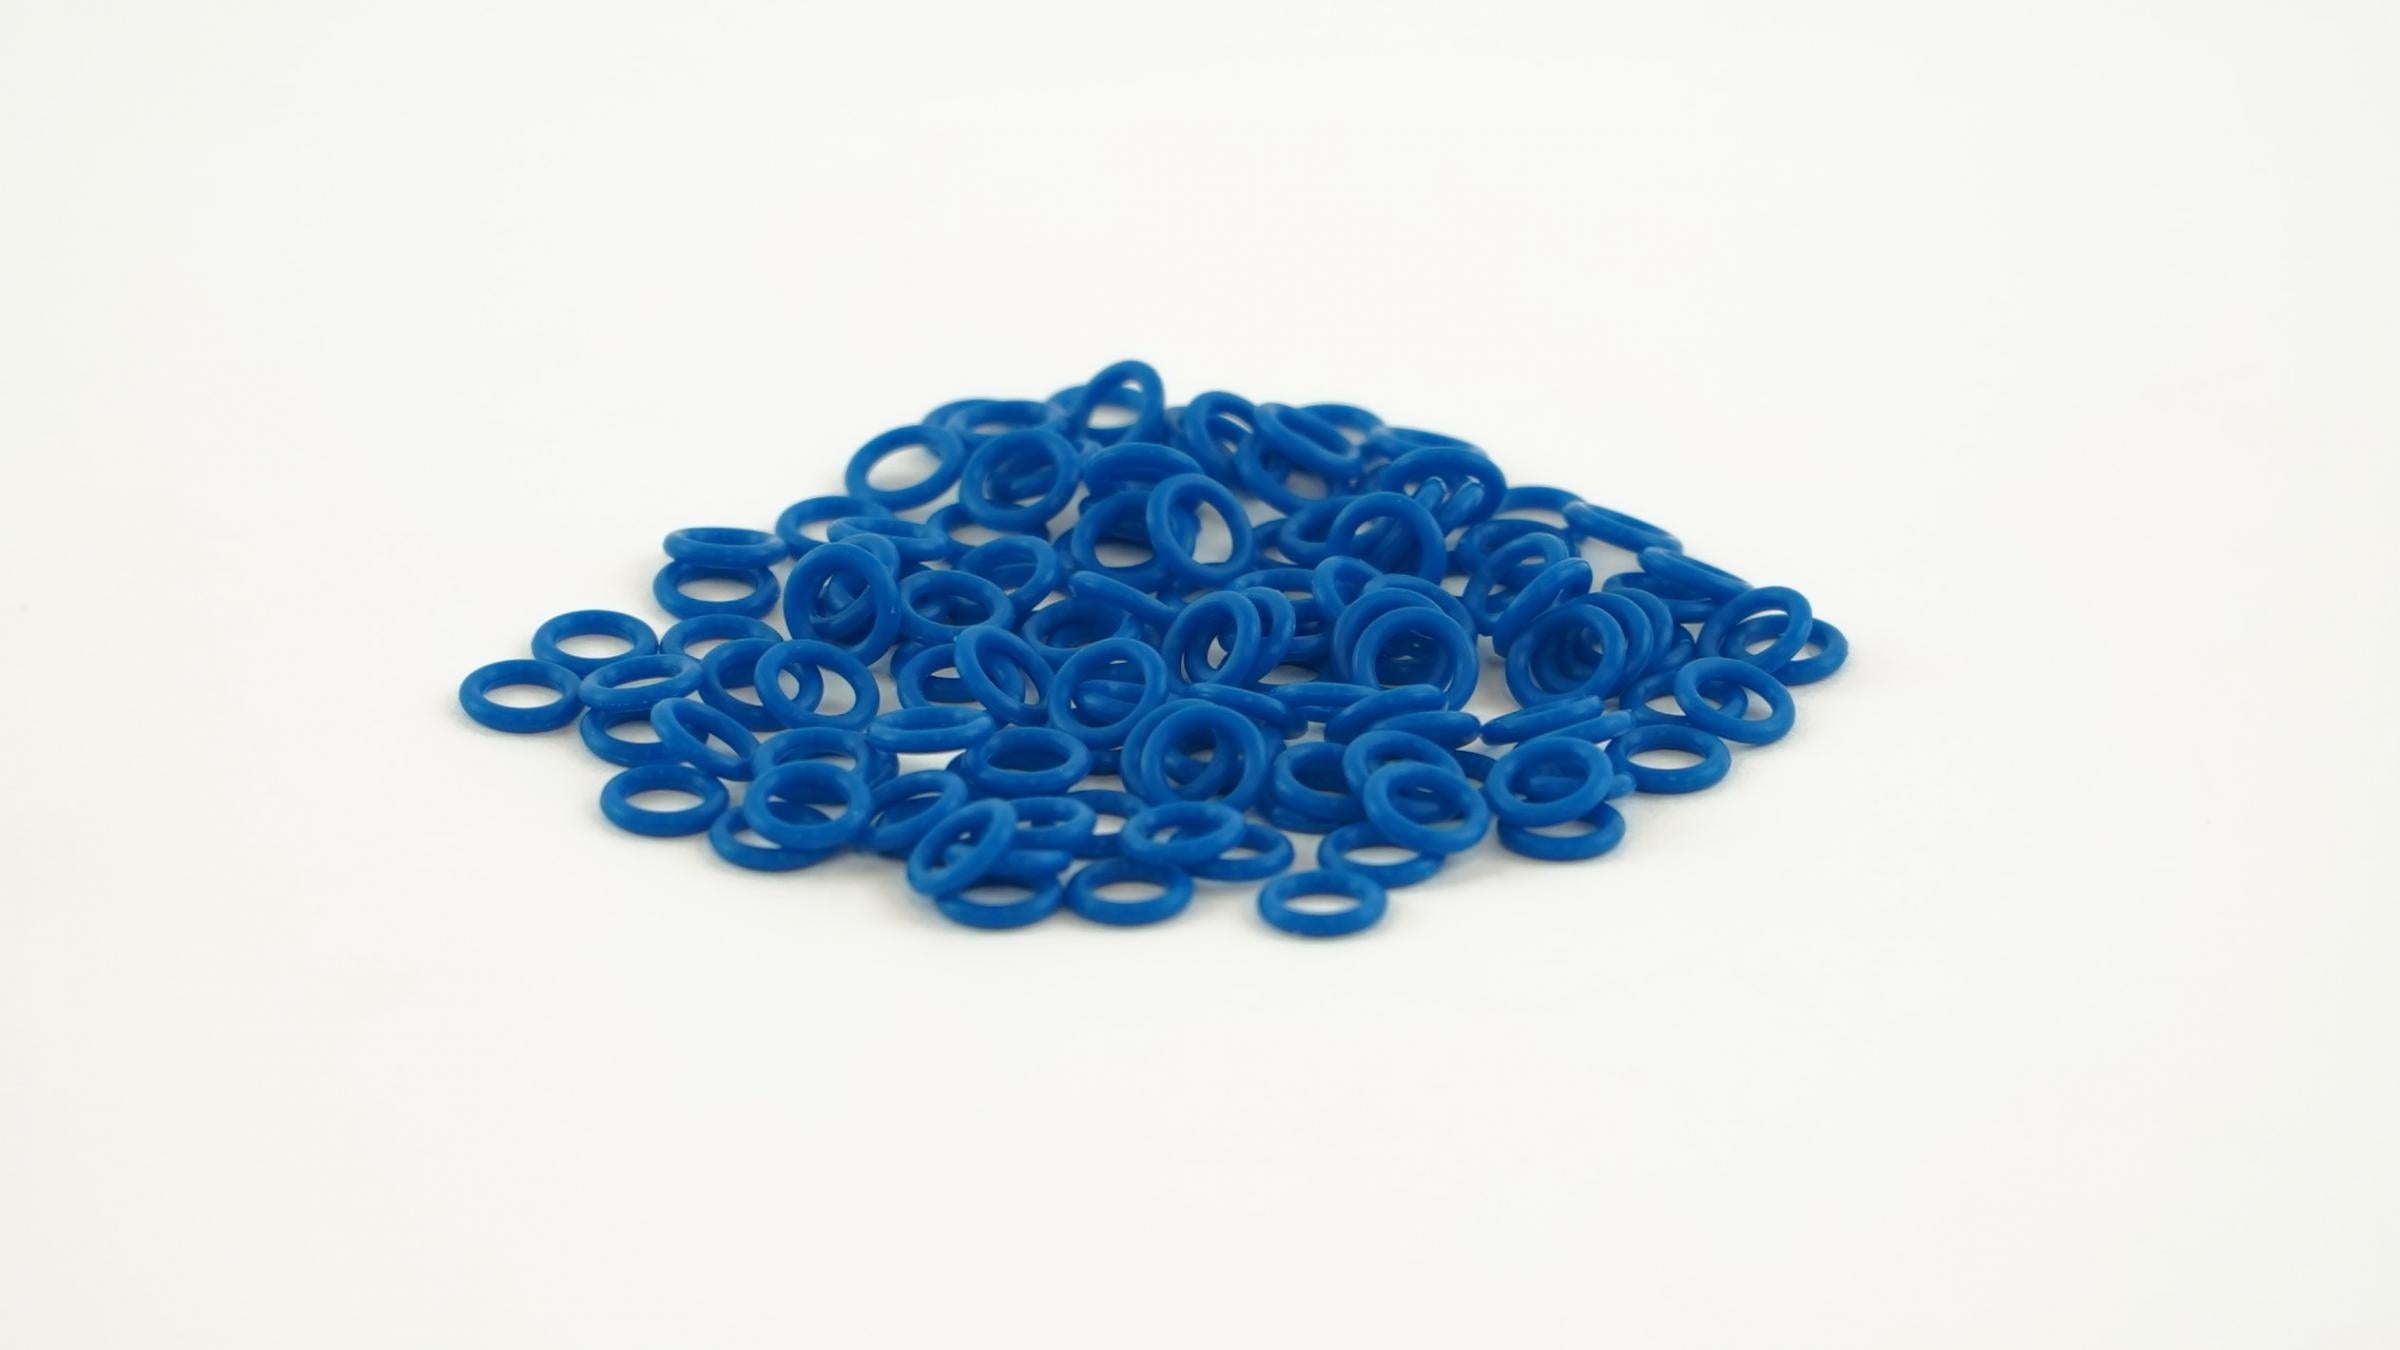 MK Pro Rings Silicone Switch Dampening O-rings 70A 1.5mm (120 Pack)